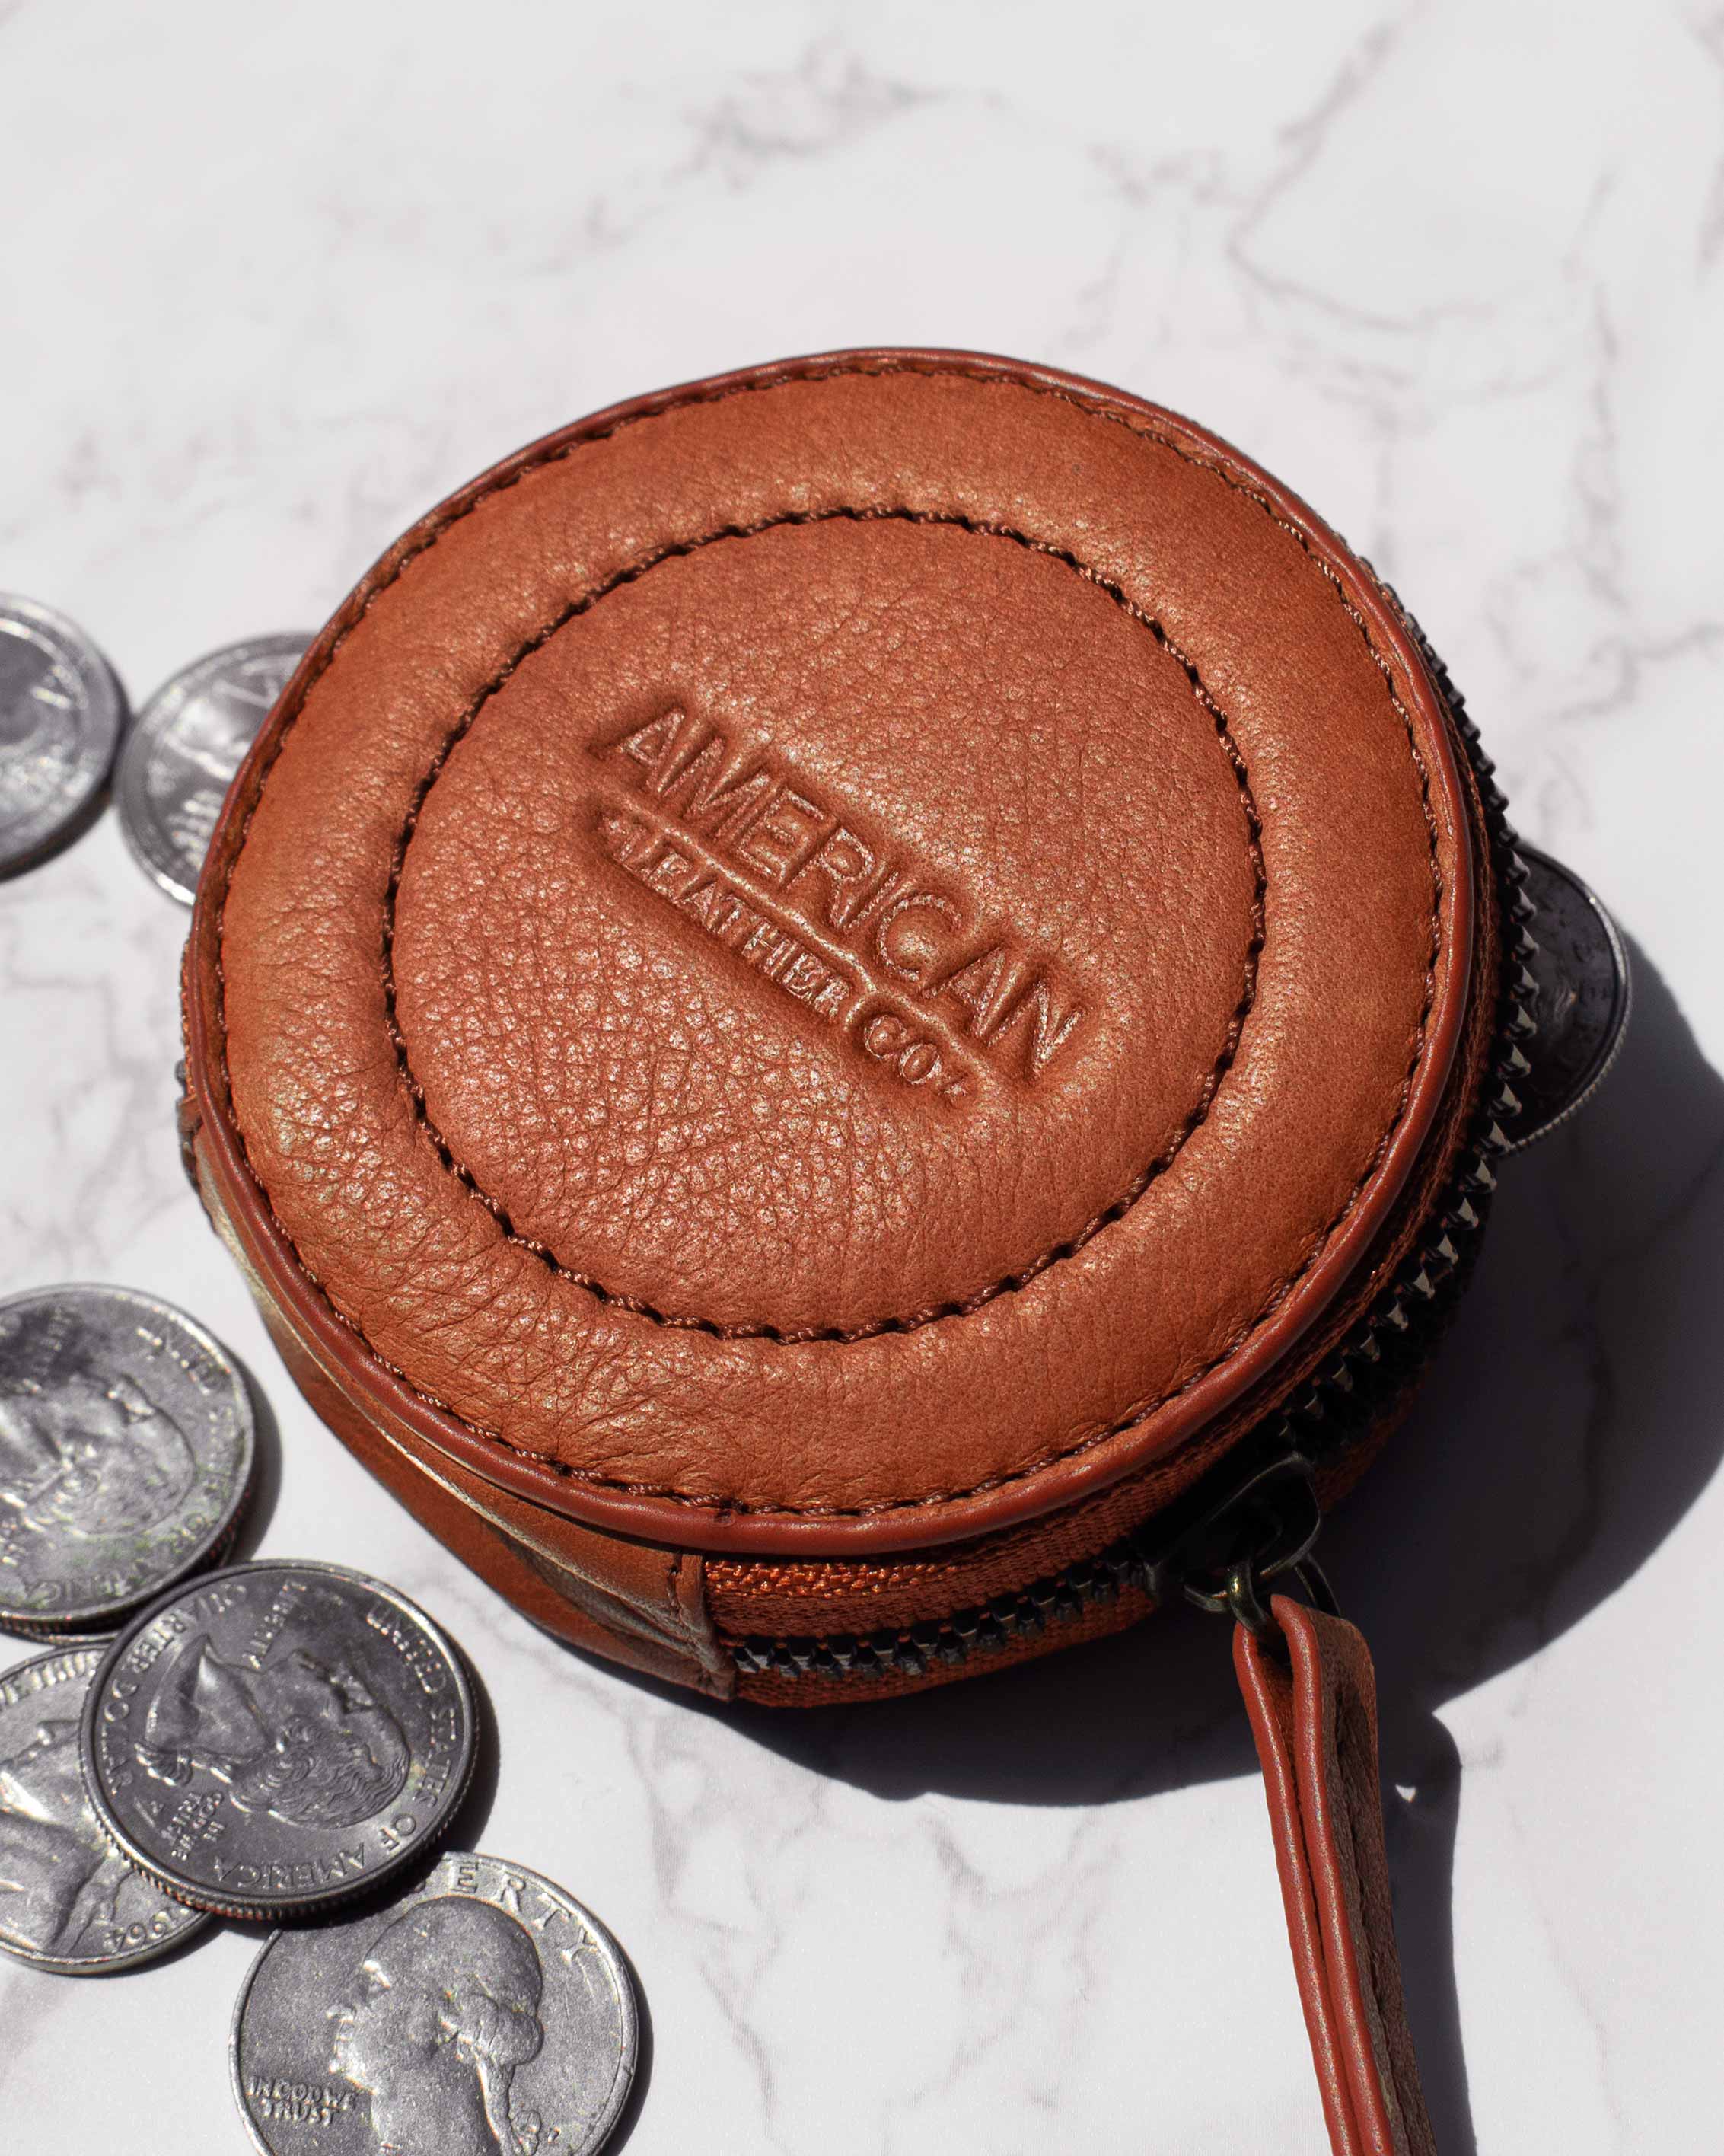 Stowe Round Coin Pouch | Cafe Latte | Fine Leather Goods | American Leather Co.